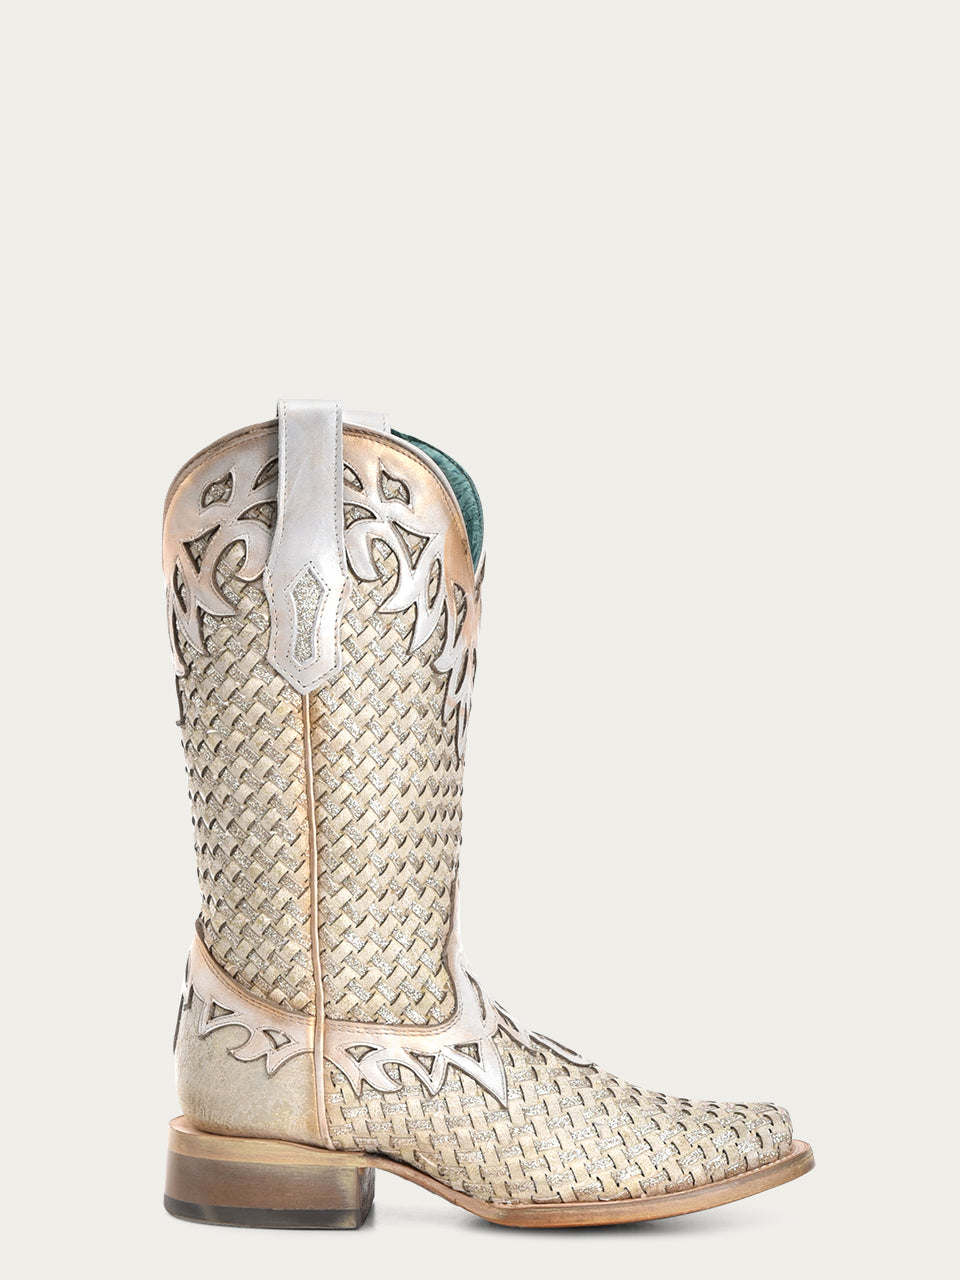 A4524 - WOMEN'S WHITE GLITTER WOVEN OVERLAY SQUARE TOE COWBOY BOOT